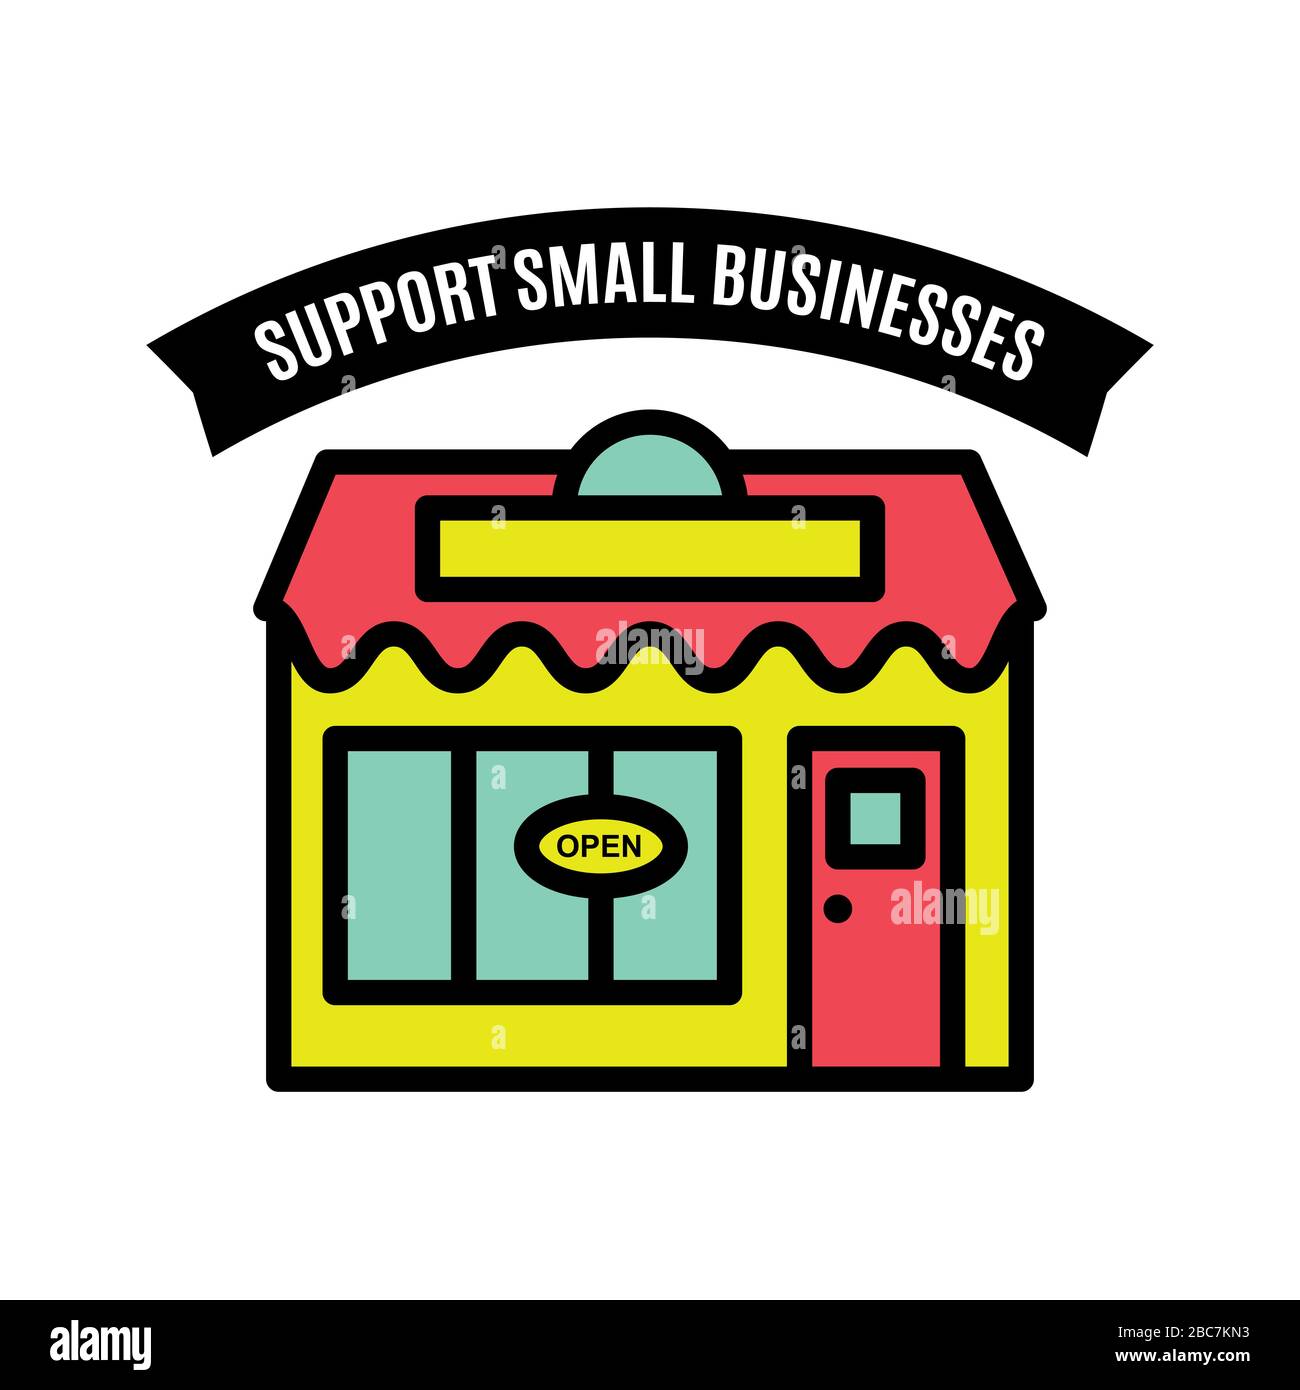 A simple storefront illustration icon in support of small businesses. Vector EPS 10 available. Stock Photo